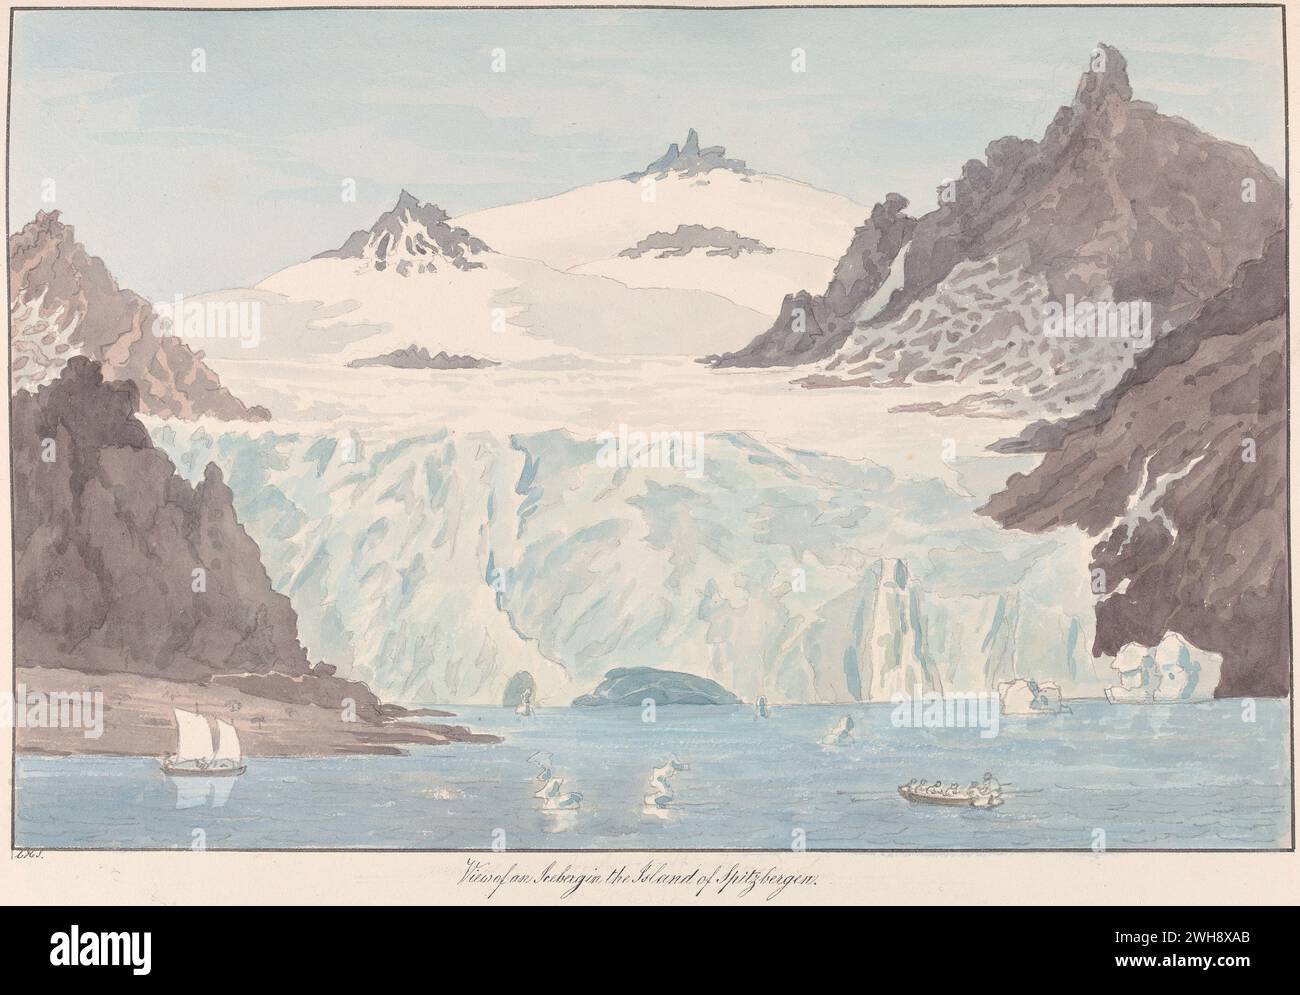 'View of an Iceberg in the Island of Spitzbergen' from the book 'Views of Polar Regions' by Charles Hamilton Smith, Belgian, undated, Watercolor and graphite on moderately thick, moderately textured, cream wove paper, Stock Photo